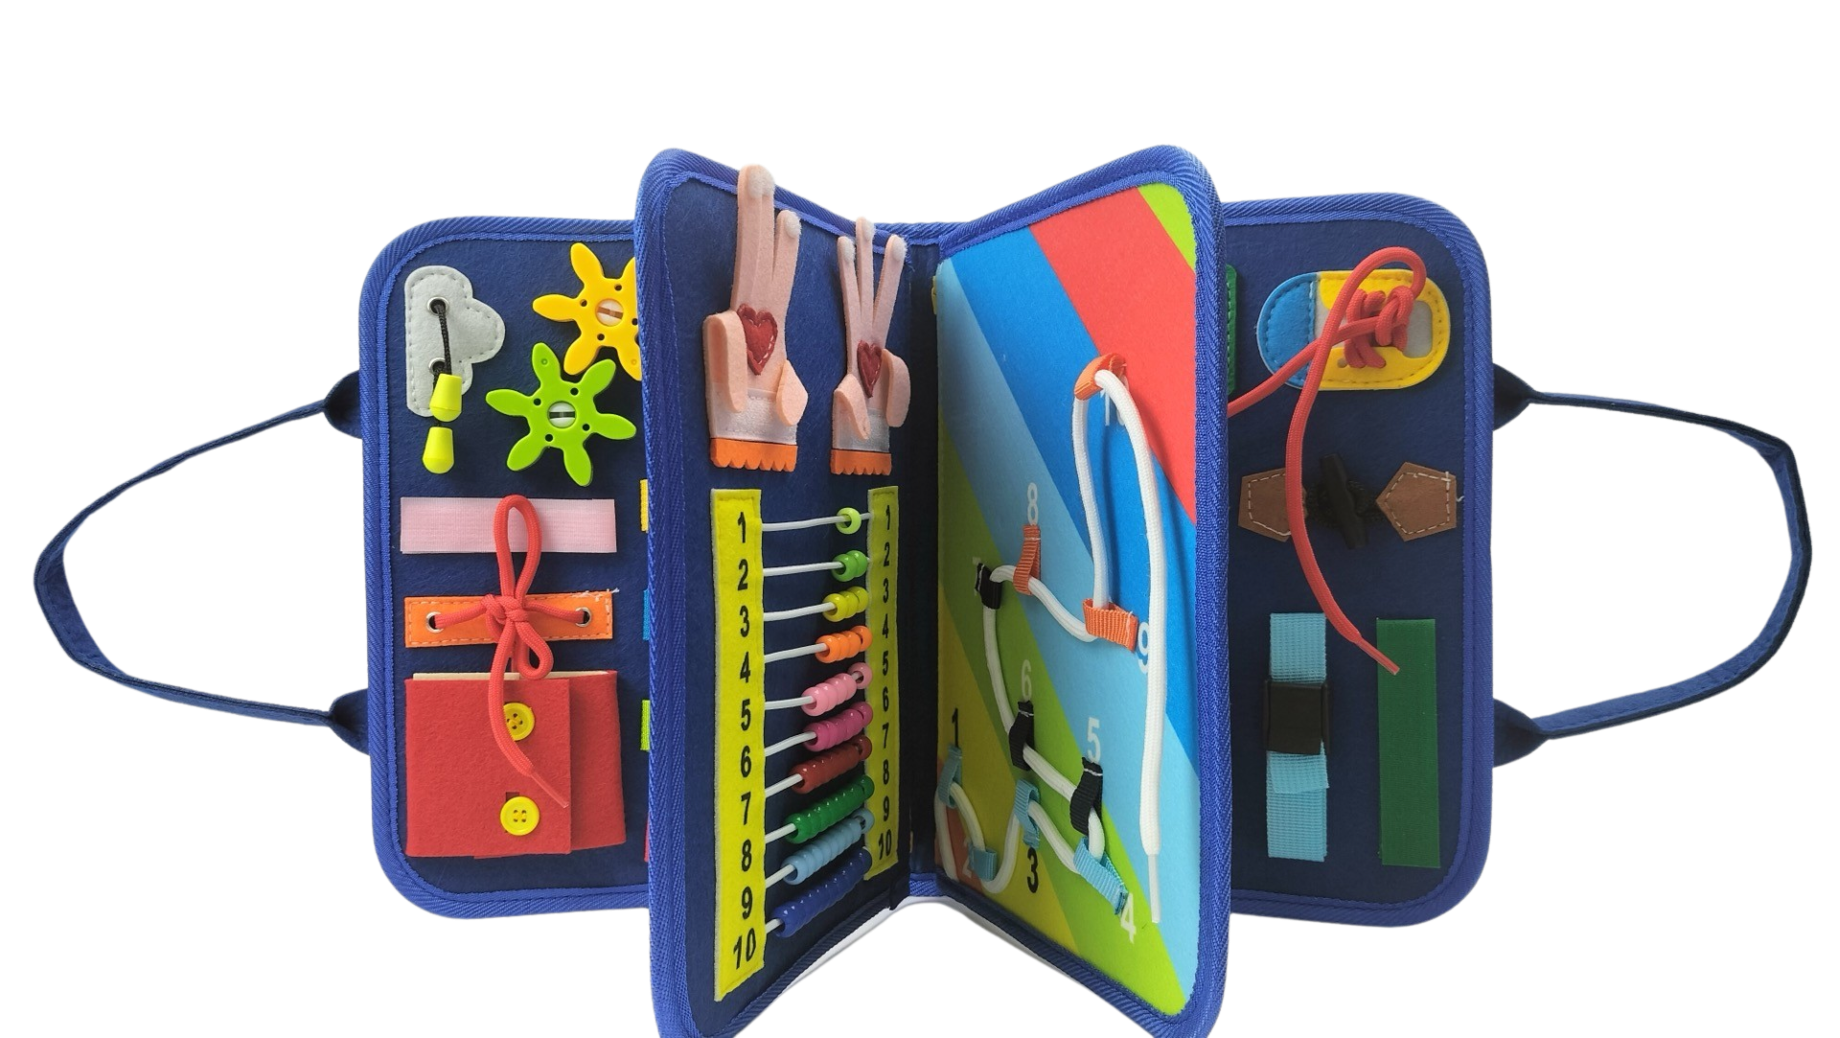 Sensory Spectrums Engaging Felt Fabric Book, Montessori-based activity boards (Numbers)